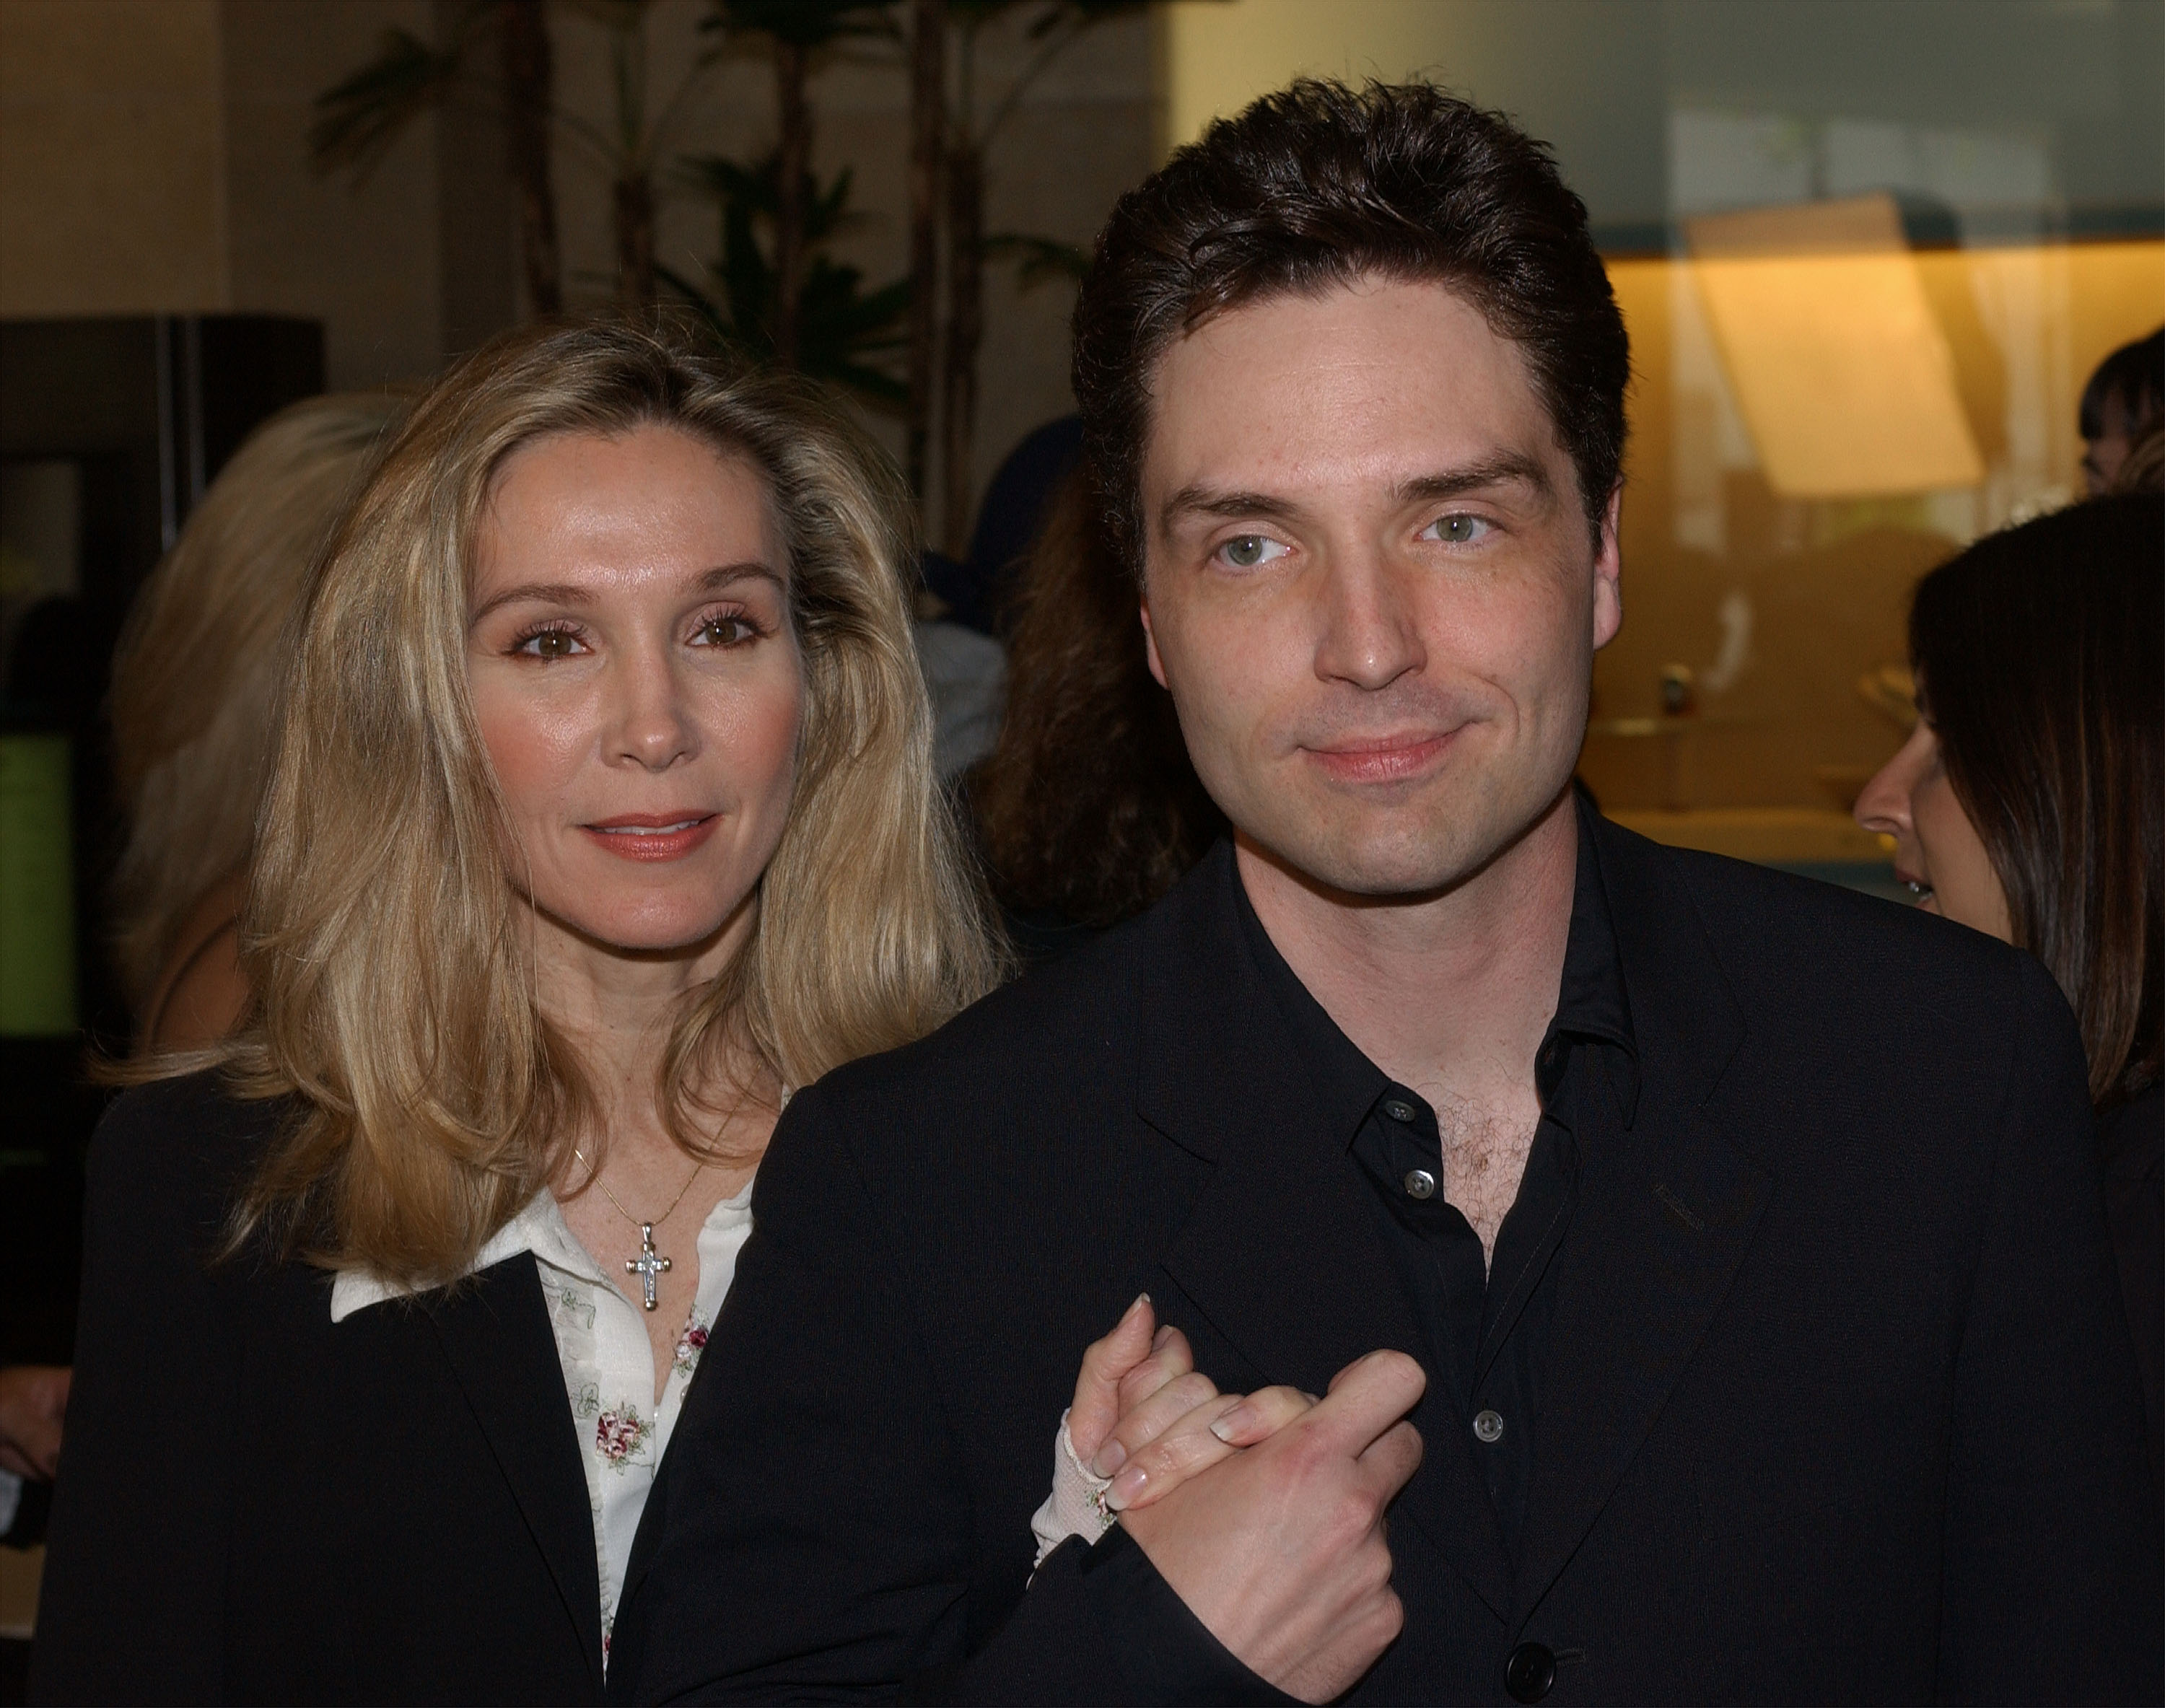 Richard Marx and Cynthia Rhodes in May 2002 in Beverly Hills, California | Source: Getty Images